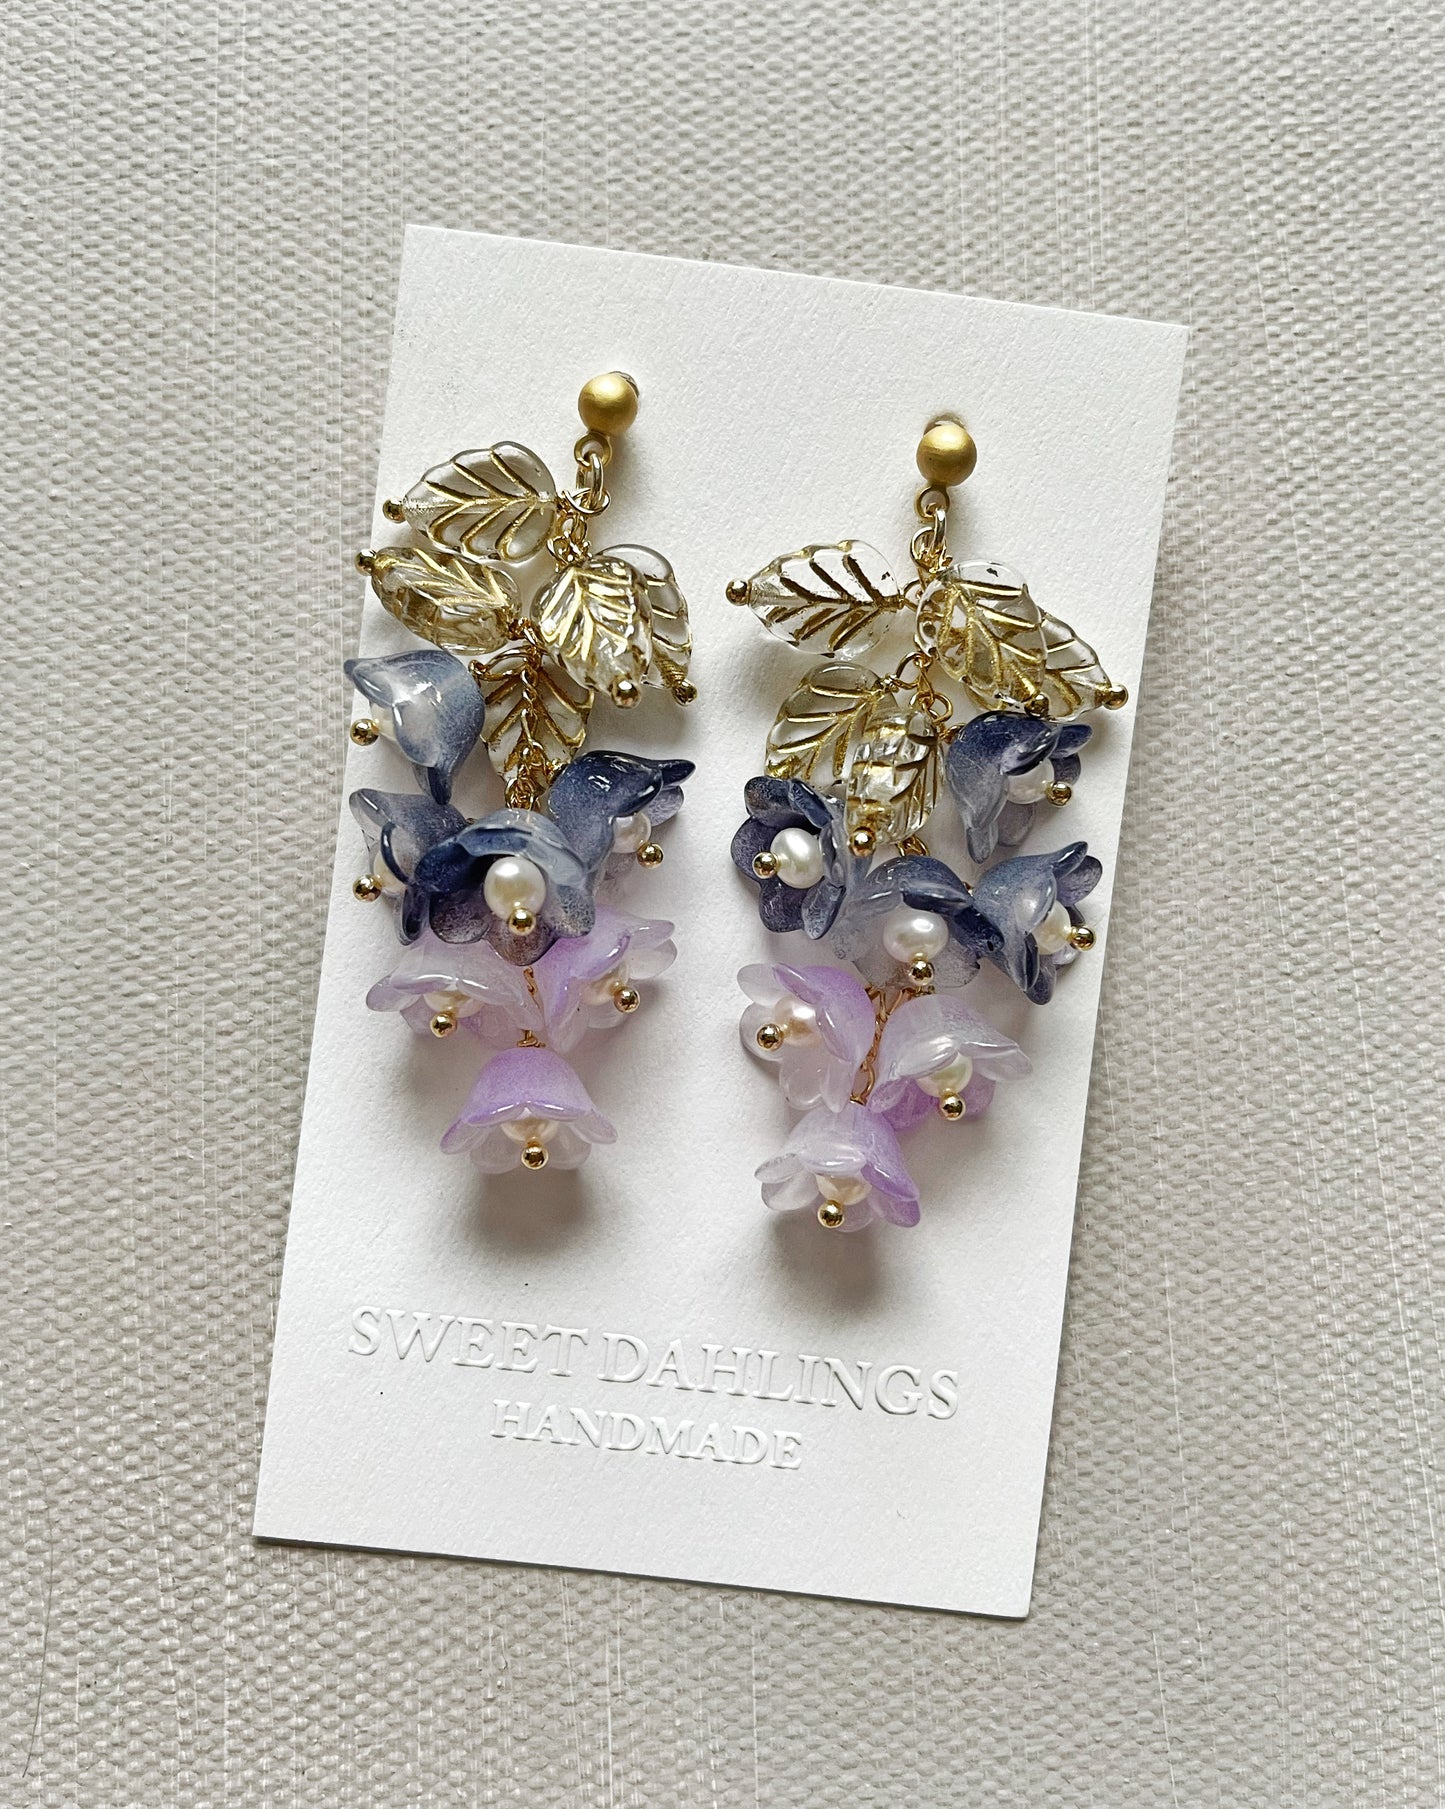 Canterbury bell flowers earrings in blueberry smoothie